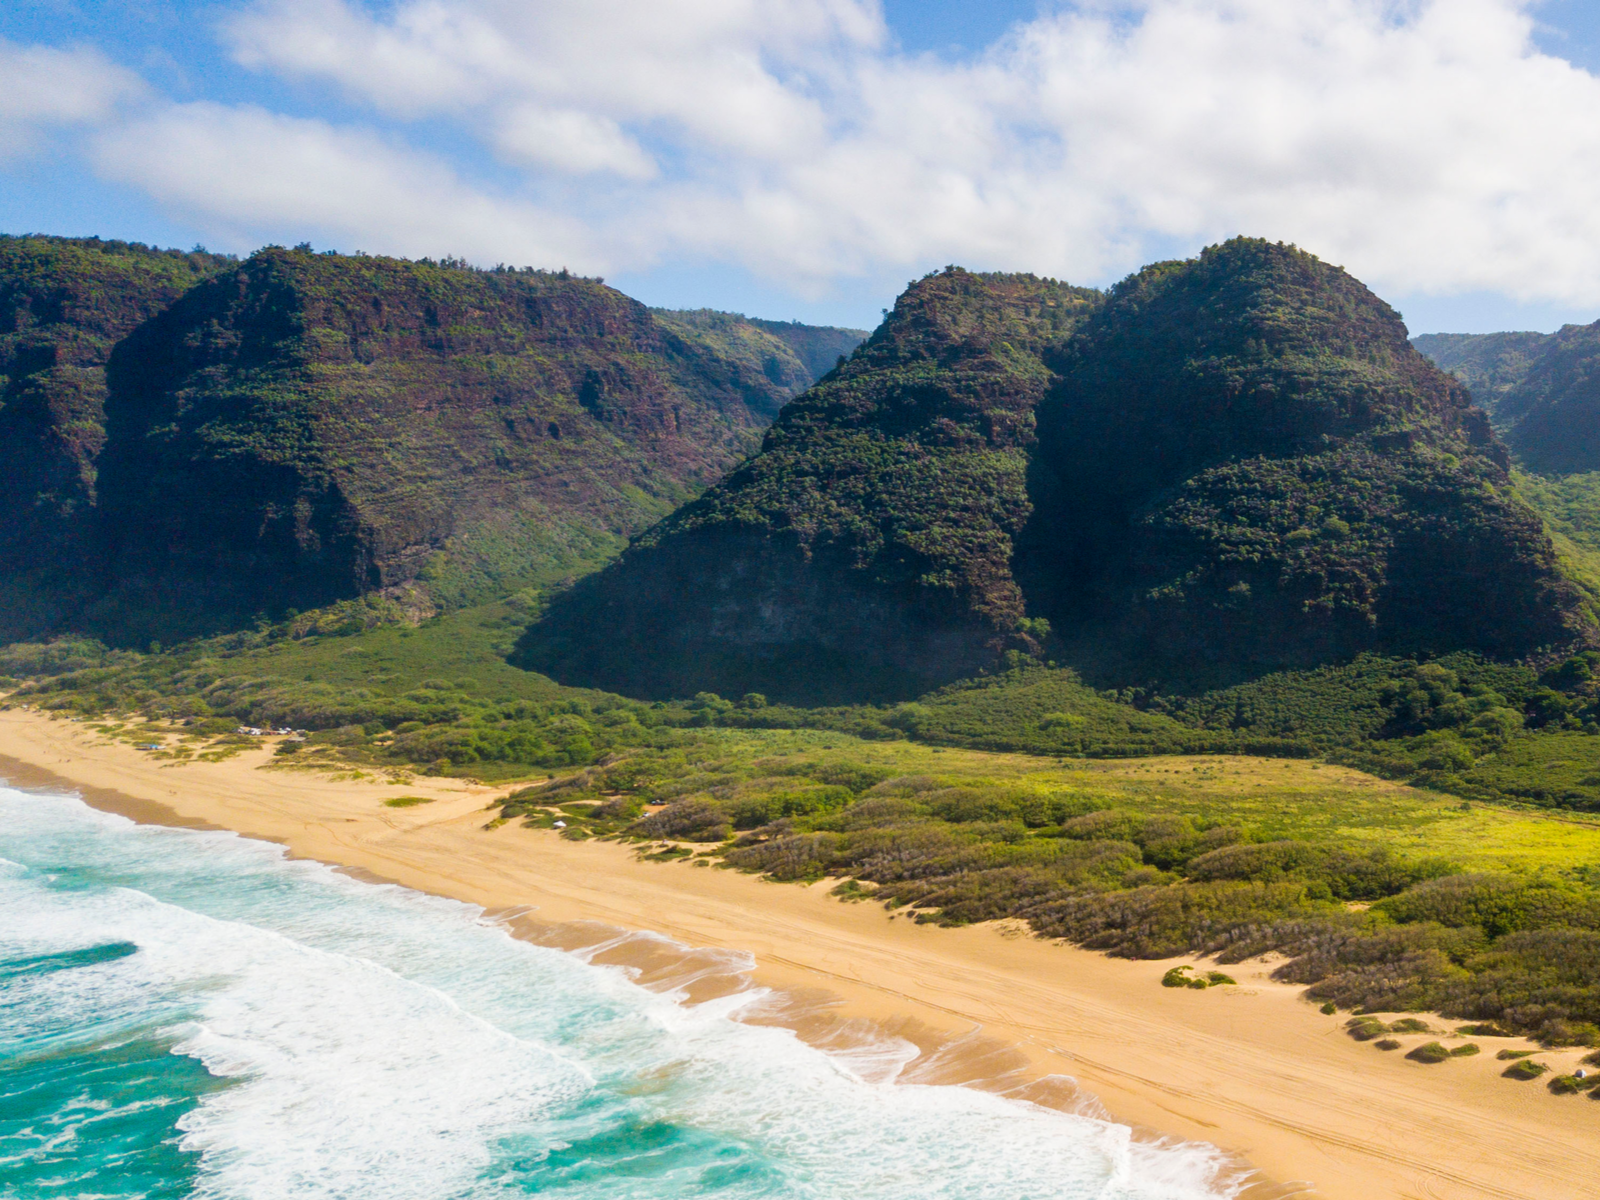 Iconic tree-covered hills and the foamy golden sand shore of Polihale Beach south of NaPali coast, considered one of the best beaches in Kauai